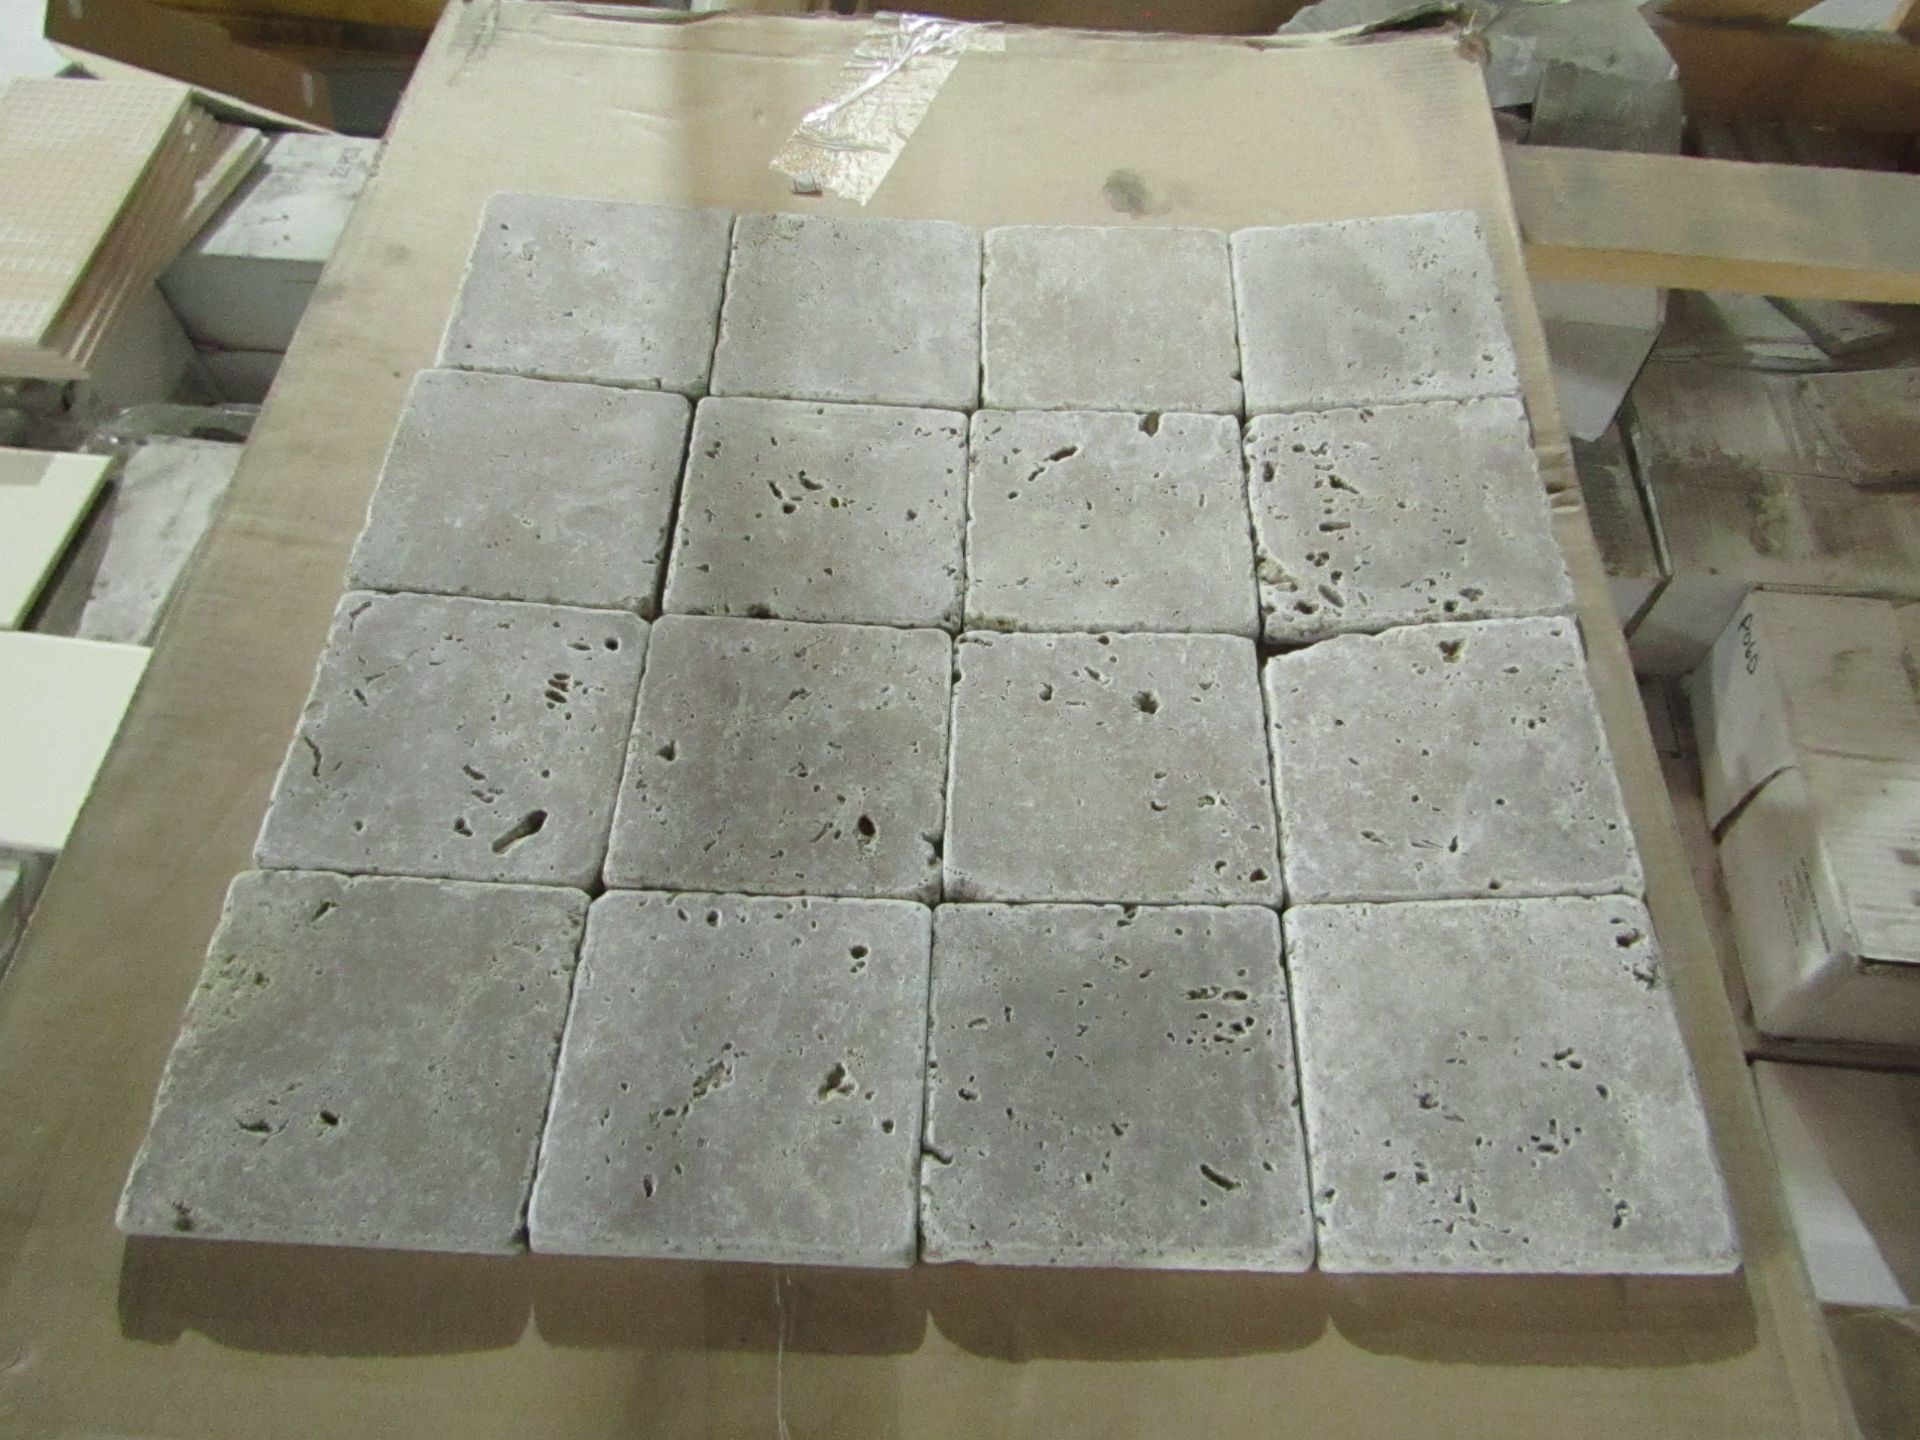 10x Boxes of 50 Tumbled travertine tiles 100 x 100mm, brand new. Total RRP ?40 a Box, Total RRP ?